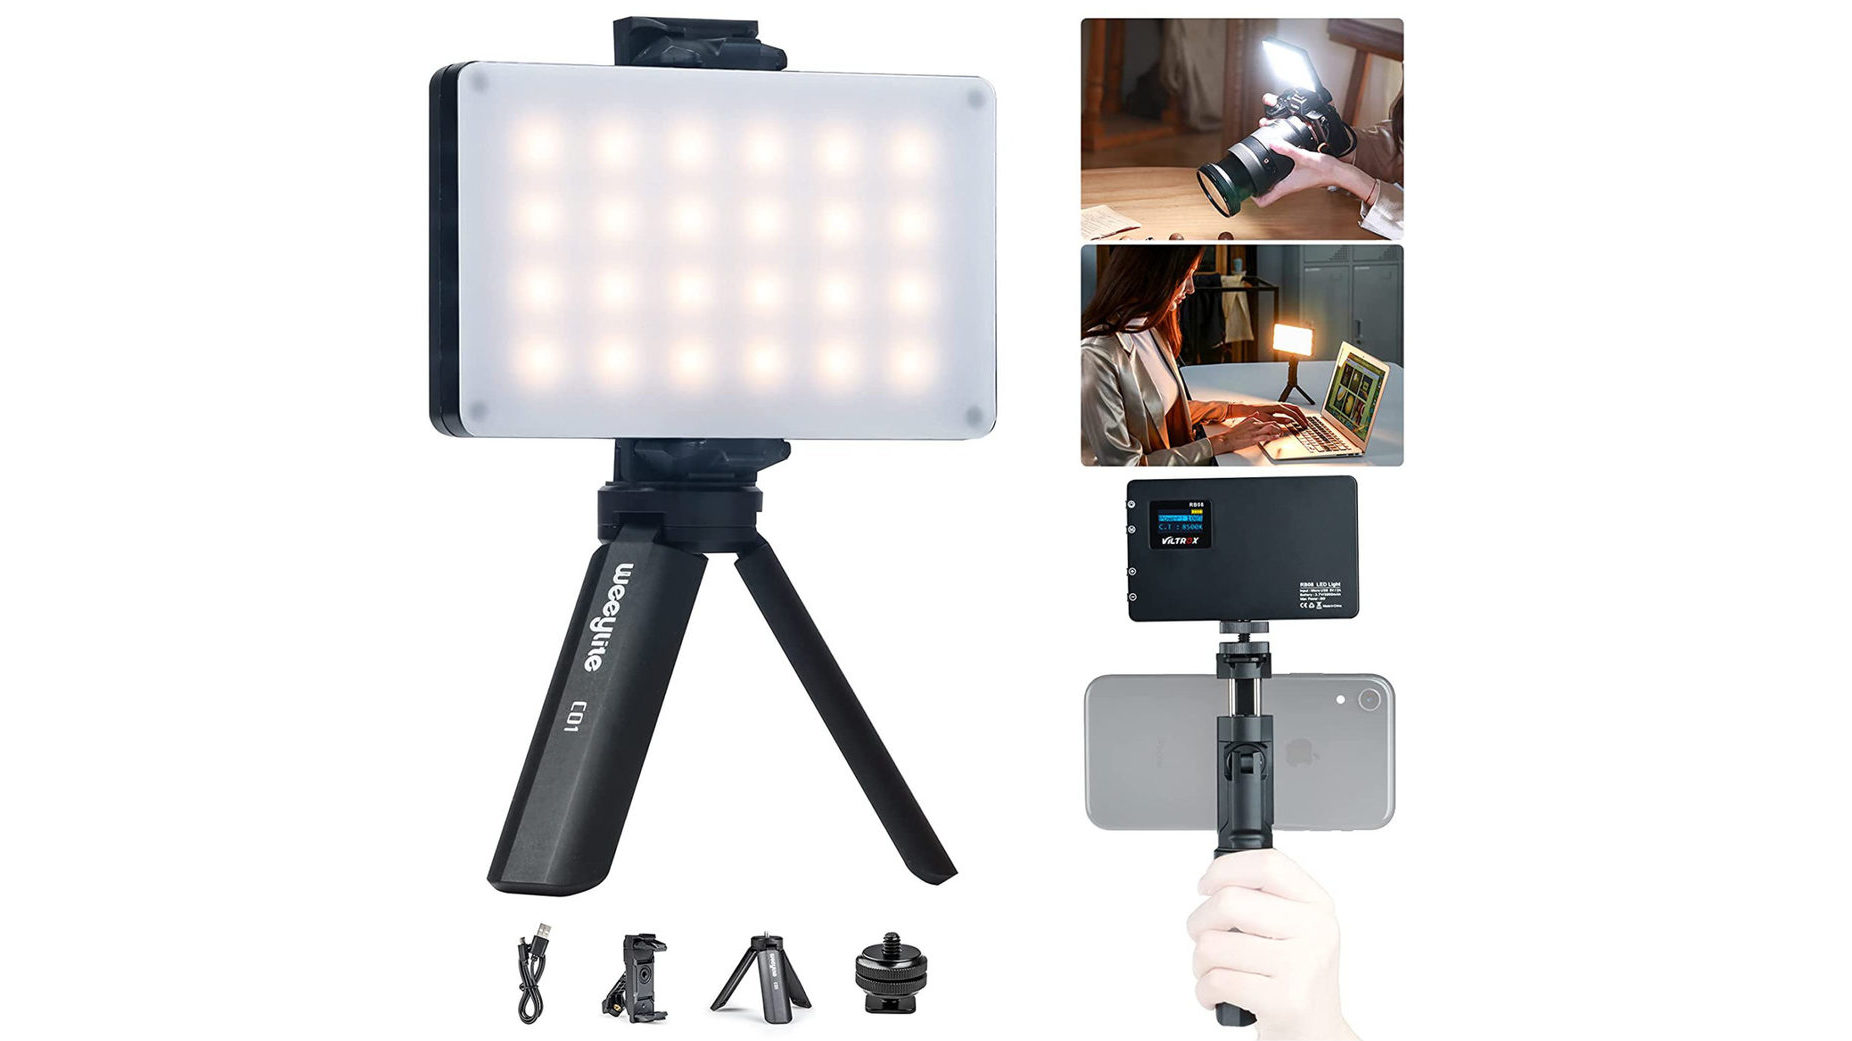 Viltrox LED Lighting Kit - Smartphone photography accessories